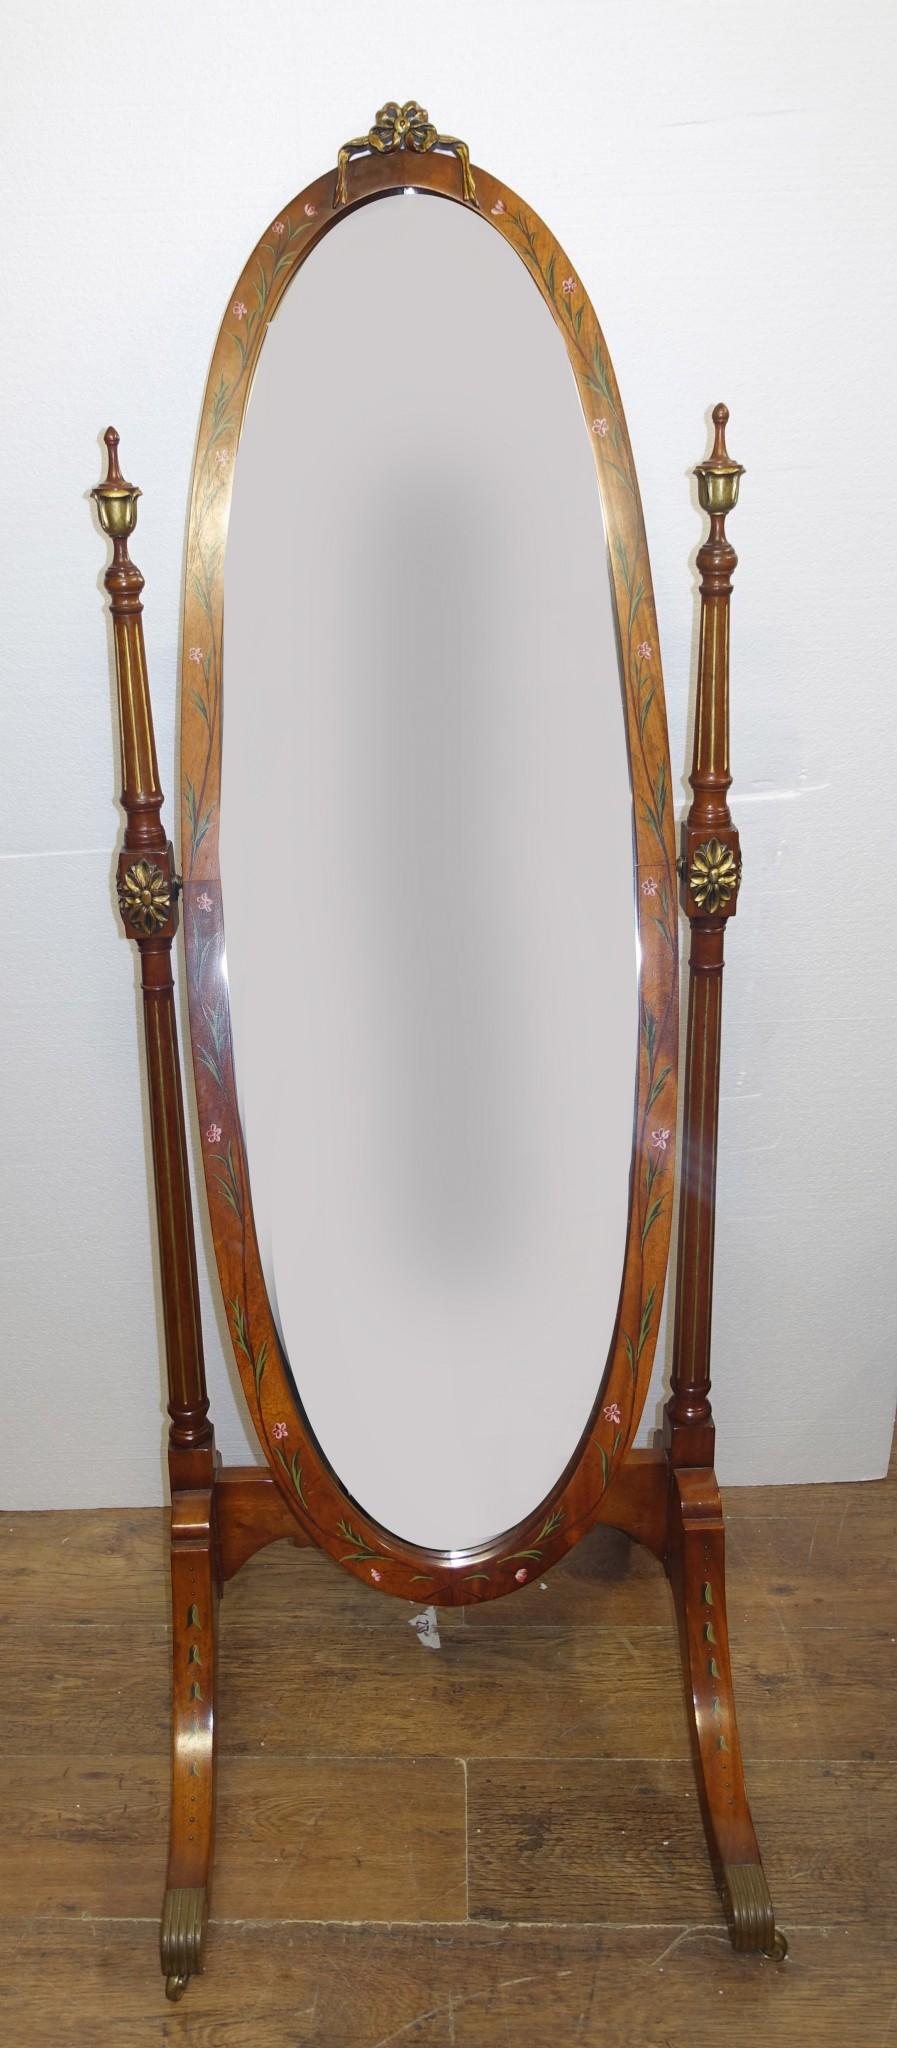 Elegant Sheraton revival satinwood cheval mirror
Great floor mirror, the oval frame swivels in the Frame Features original brass fixtures including the castors to the four feet
Wood has hand painted details showing floral motifs and leaves Circa